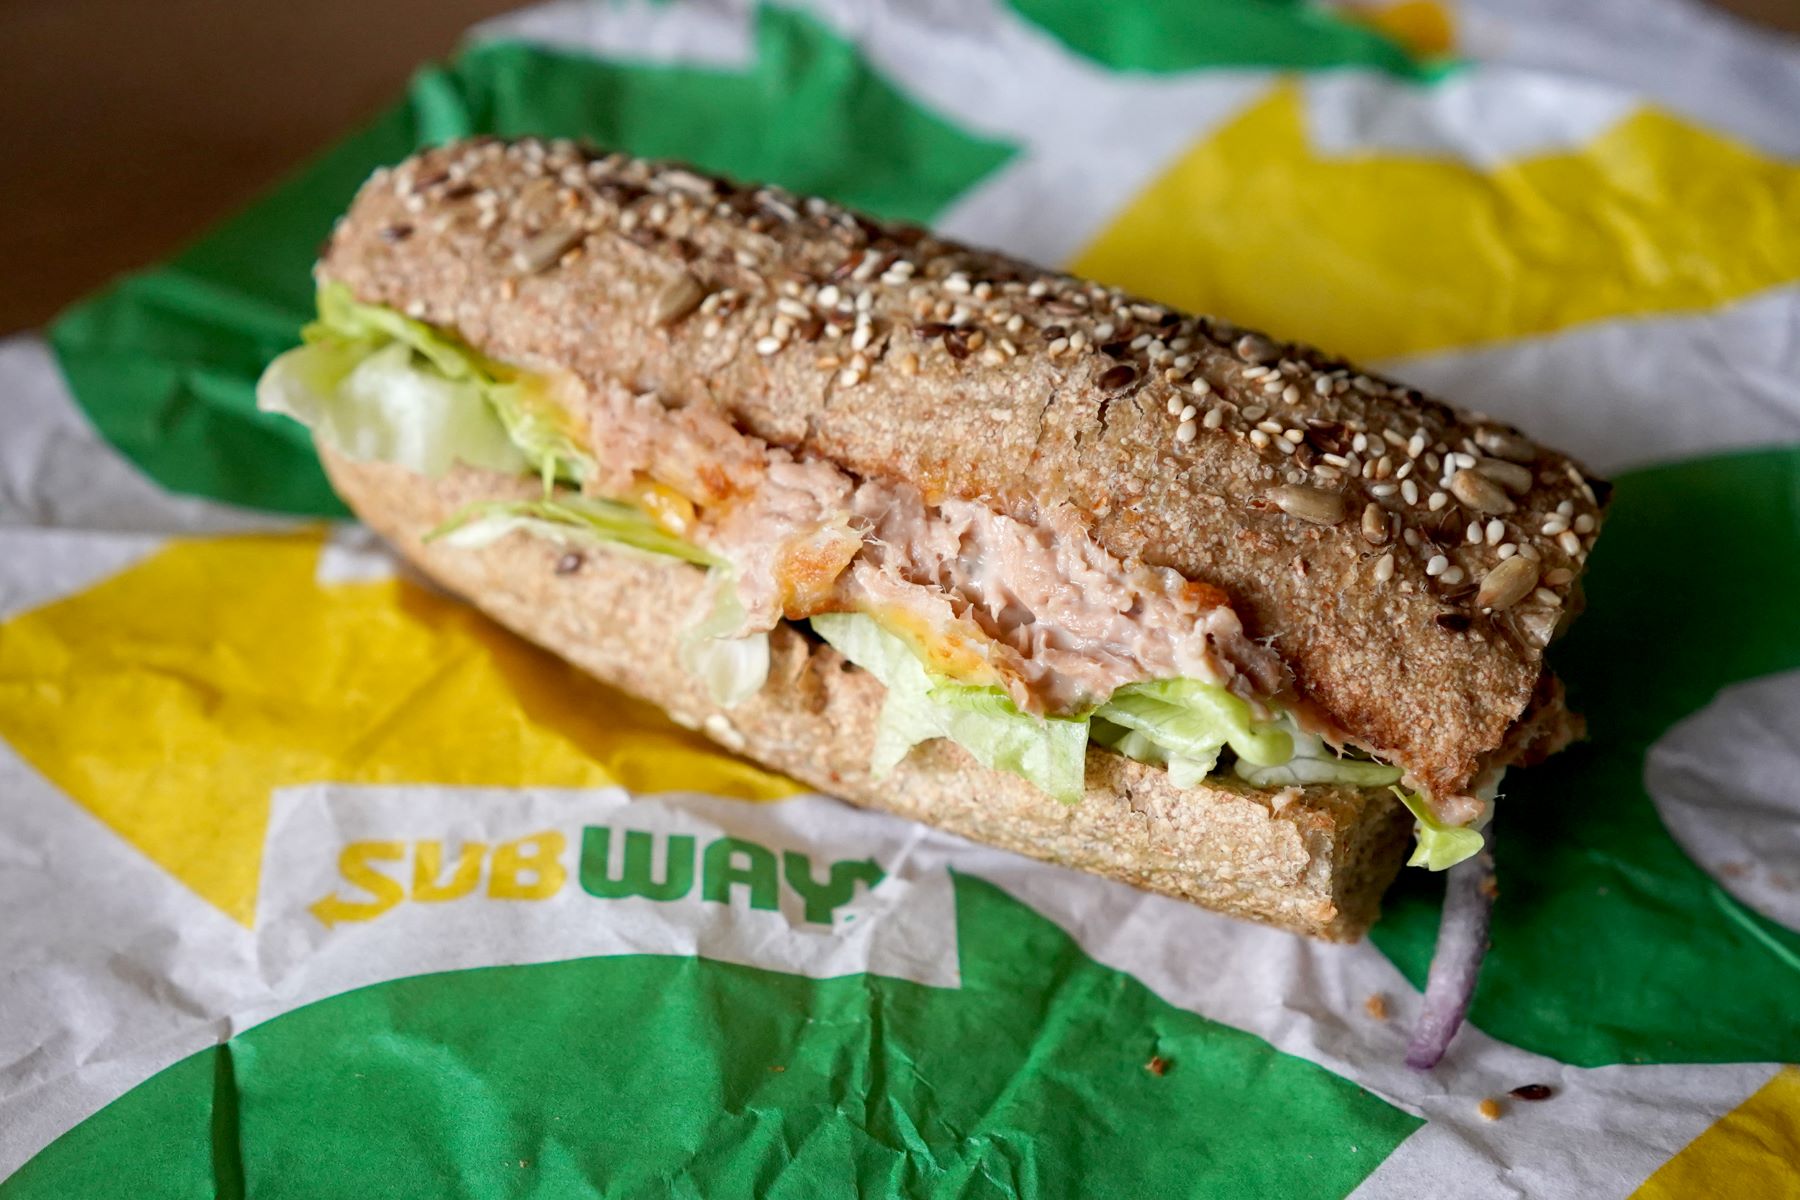 The Surprising Ingredients In Subway's Tuna Salad Revealed!